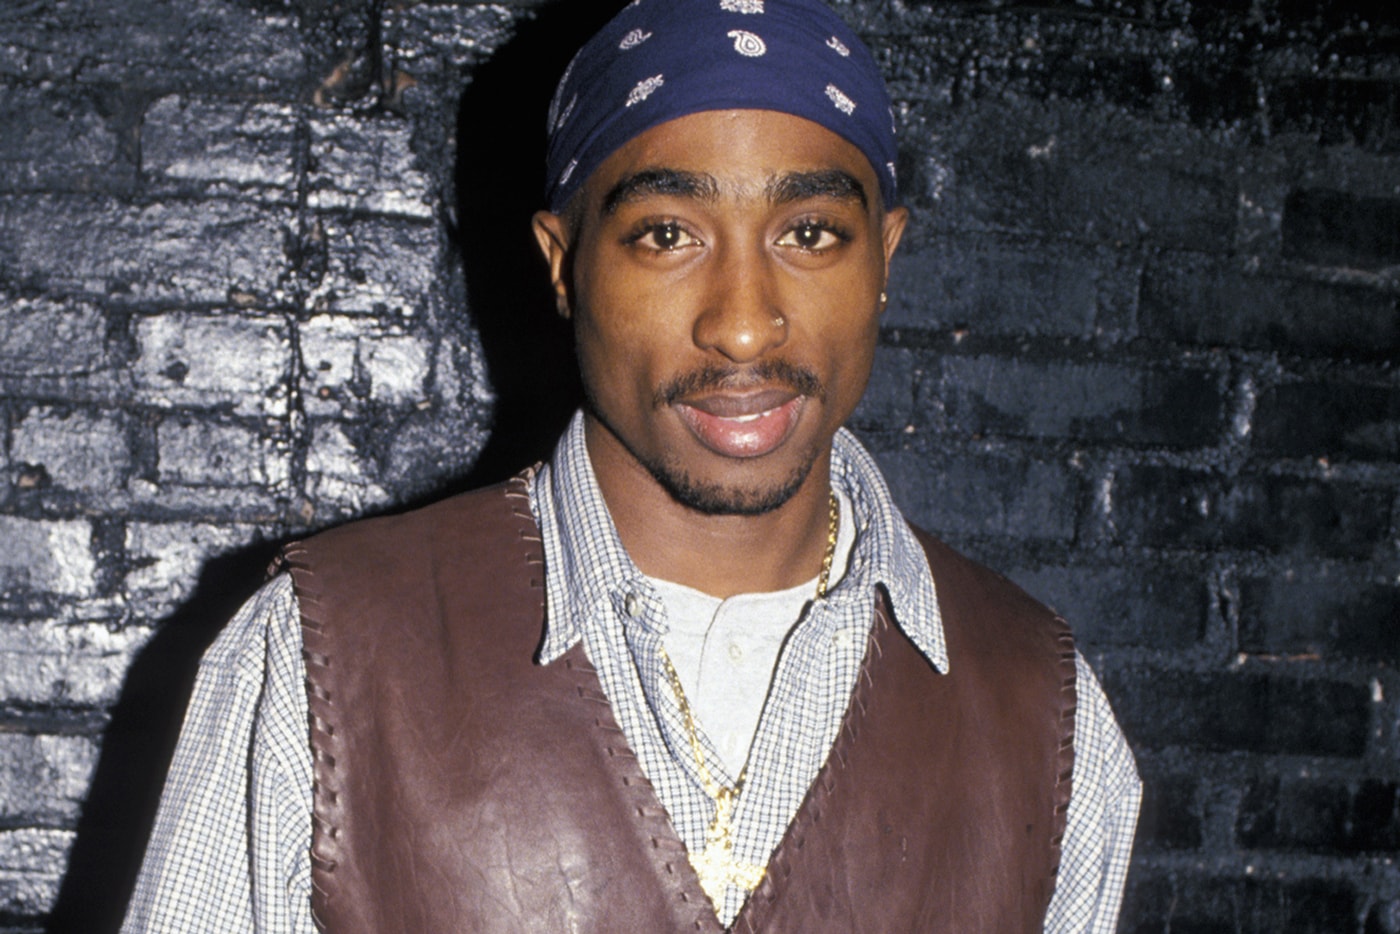 There Will Be New 2Pac Material Coming Soon